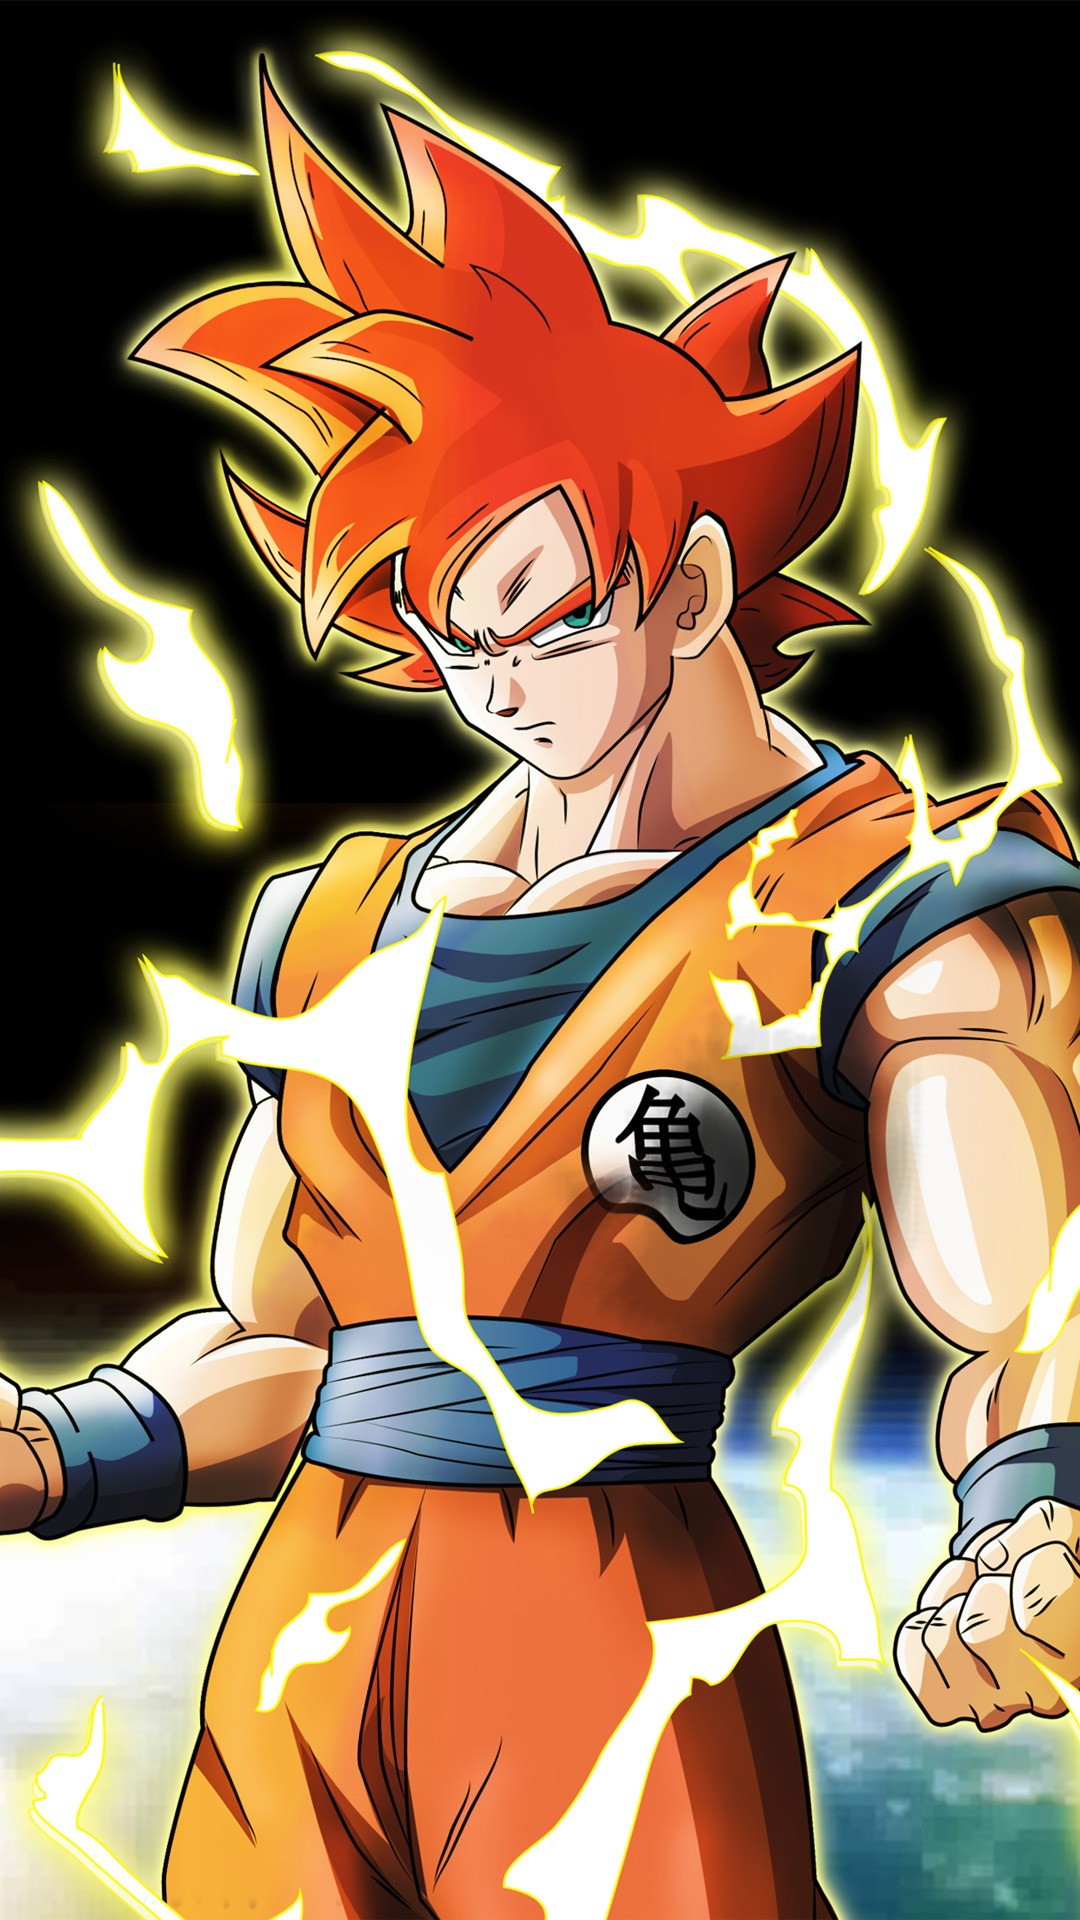 Goku Super Saiyan God Android Wallpaper with high-resolution 1080x1920 pixel. You can use and set as wallpaper for Notebook Screensavers, Mac Wallpapers, Mobile Home Screen, iPhone or Android Phones Lock Screen